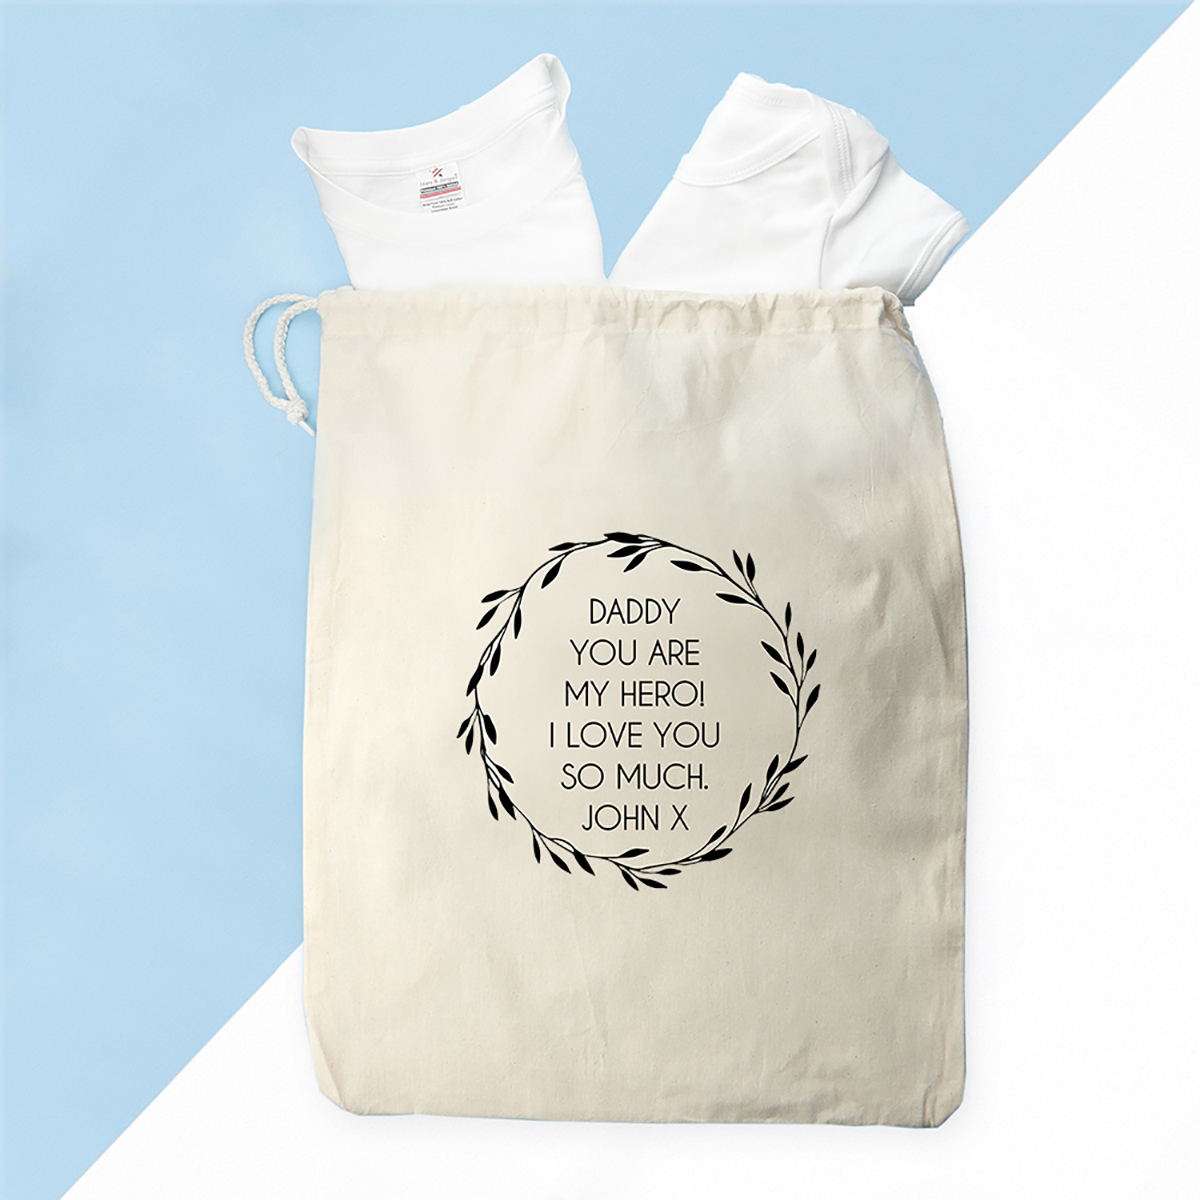 Daddy & Me T-Shirt Set - Here Comes Trouble With Personalised Bag